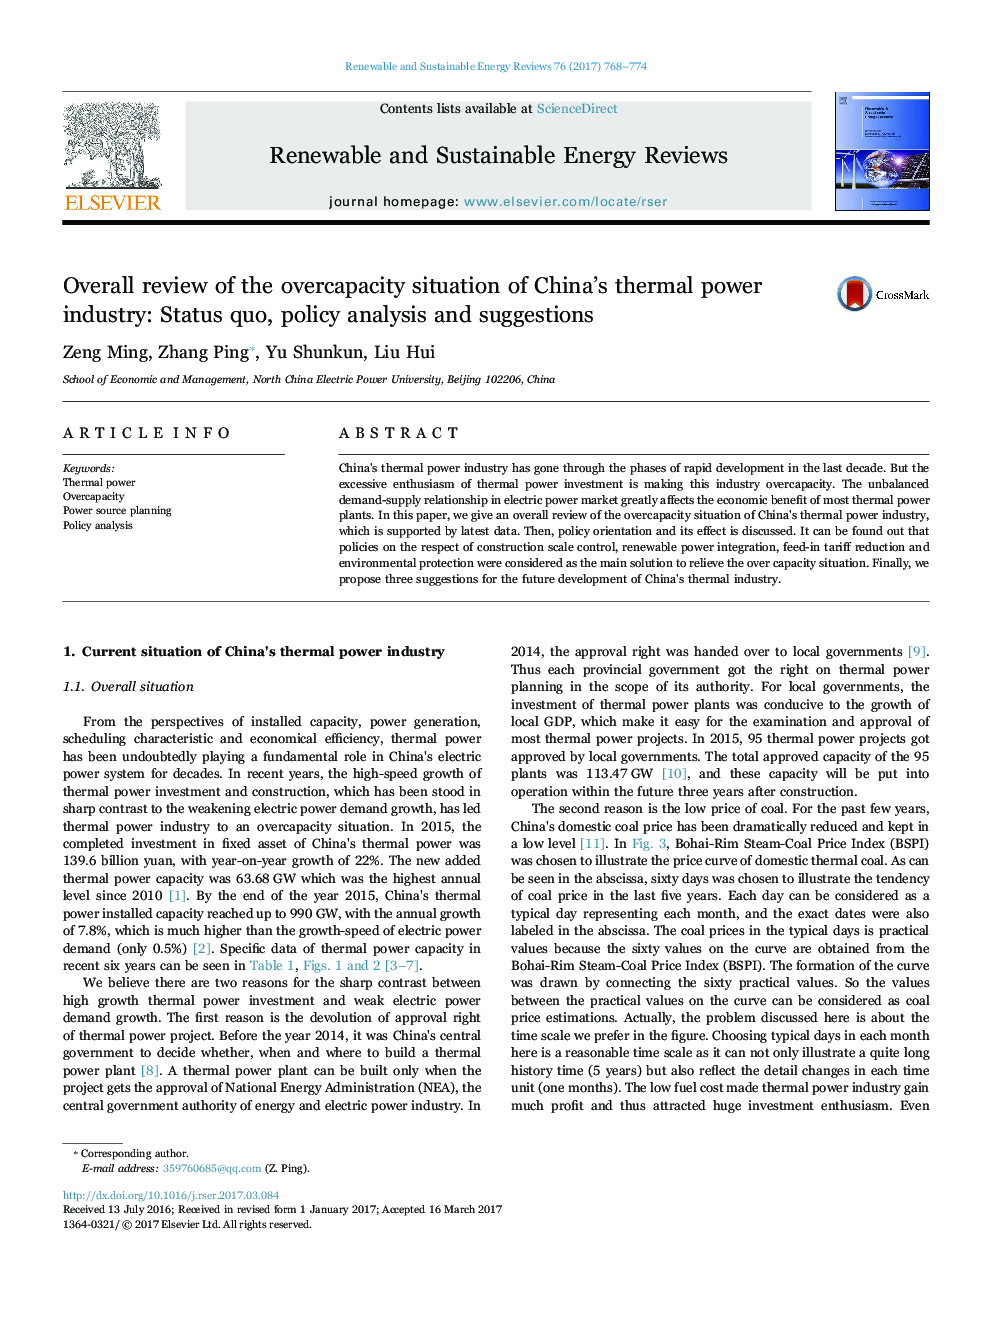 Overall review of the overcapacity situation of China's thermal power industry: Status quo, policy analysis and suggestions